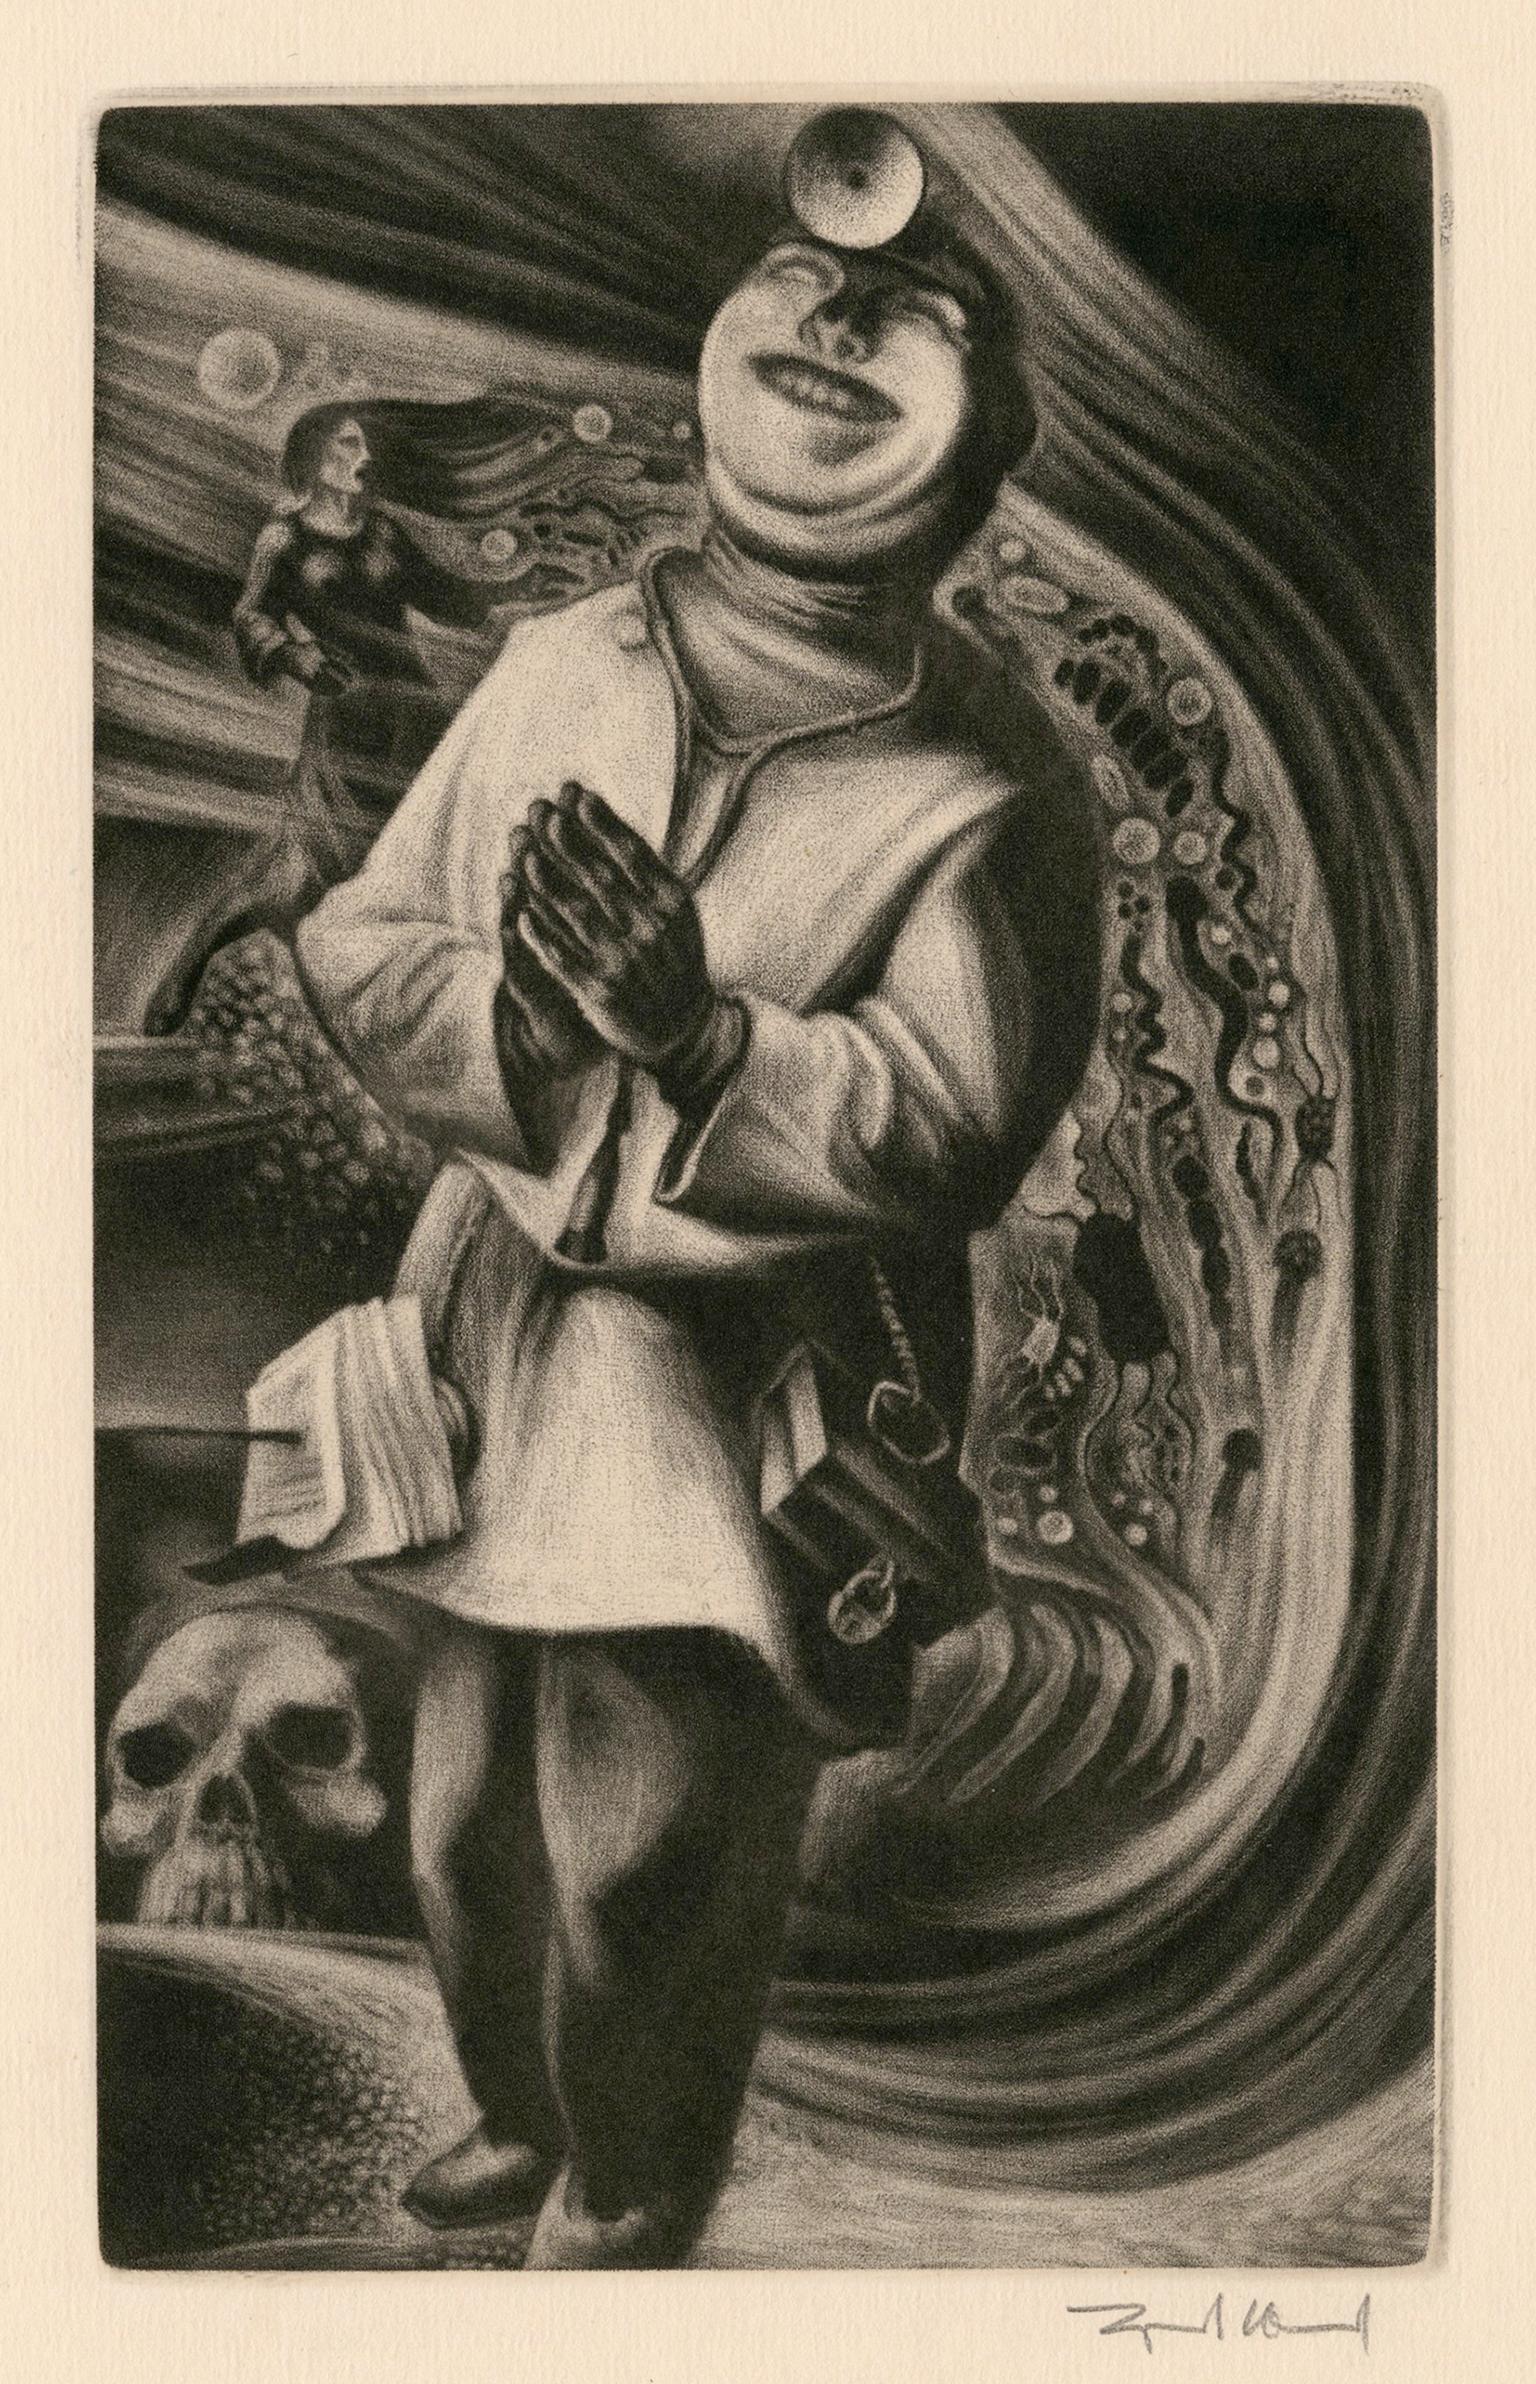 Lynd Ward Figurative Print - 'Doctor' from 'In Praise of Folly' — 1940s Graphic Modernism